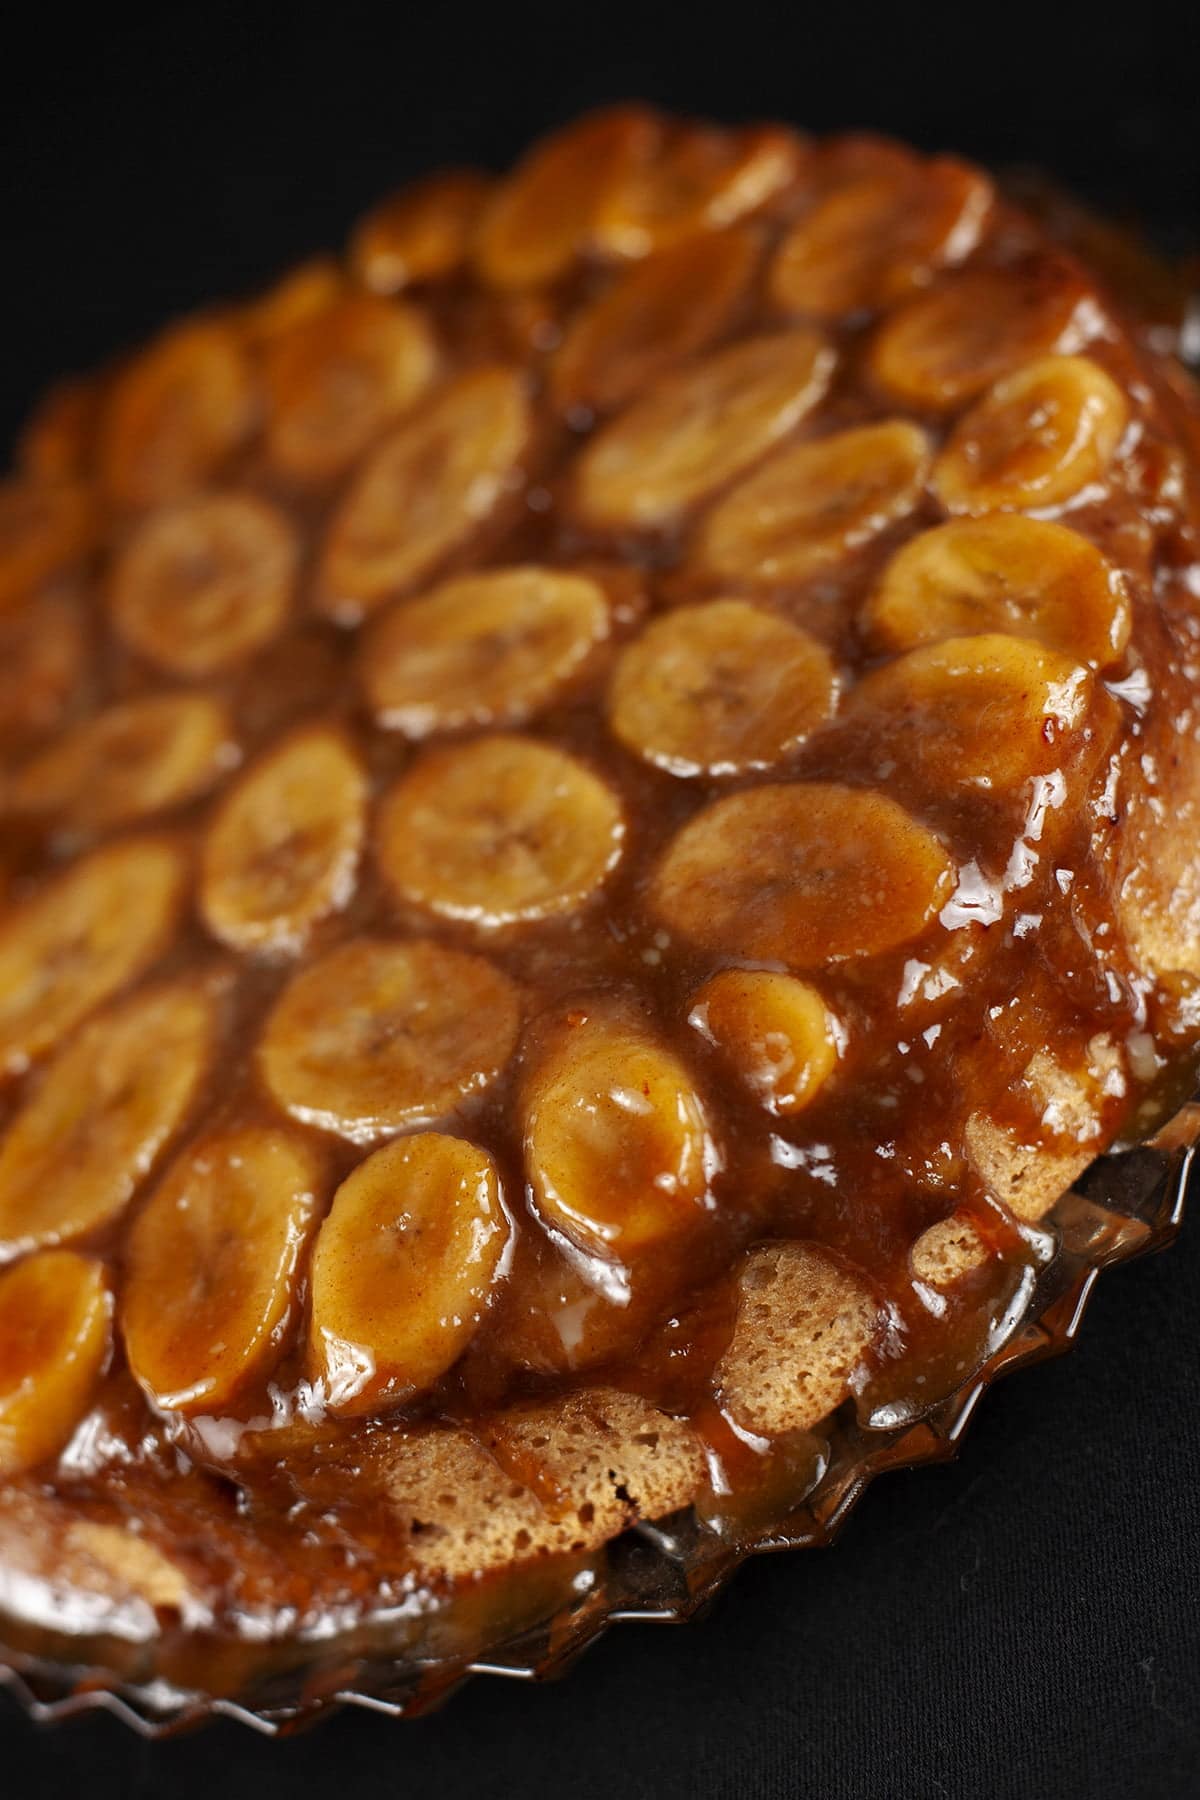 A bananas foster upside down cake: A large round cinnamon rum cake, topped with bananas and a cinnamon rum caramel... upside-down cake style.